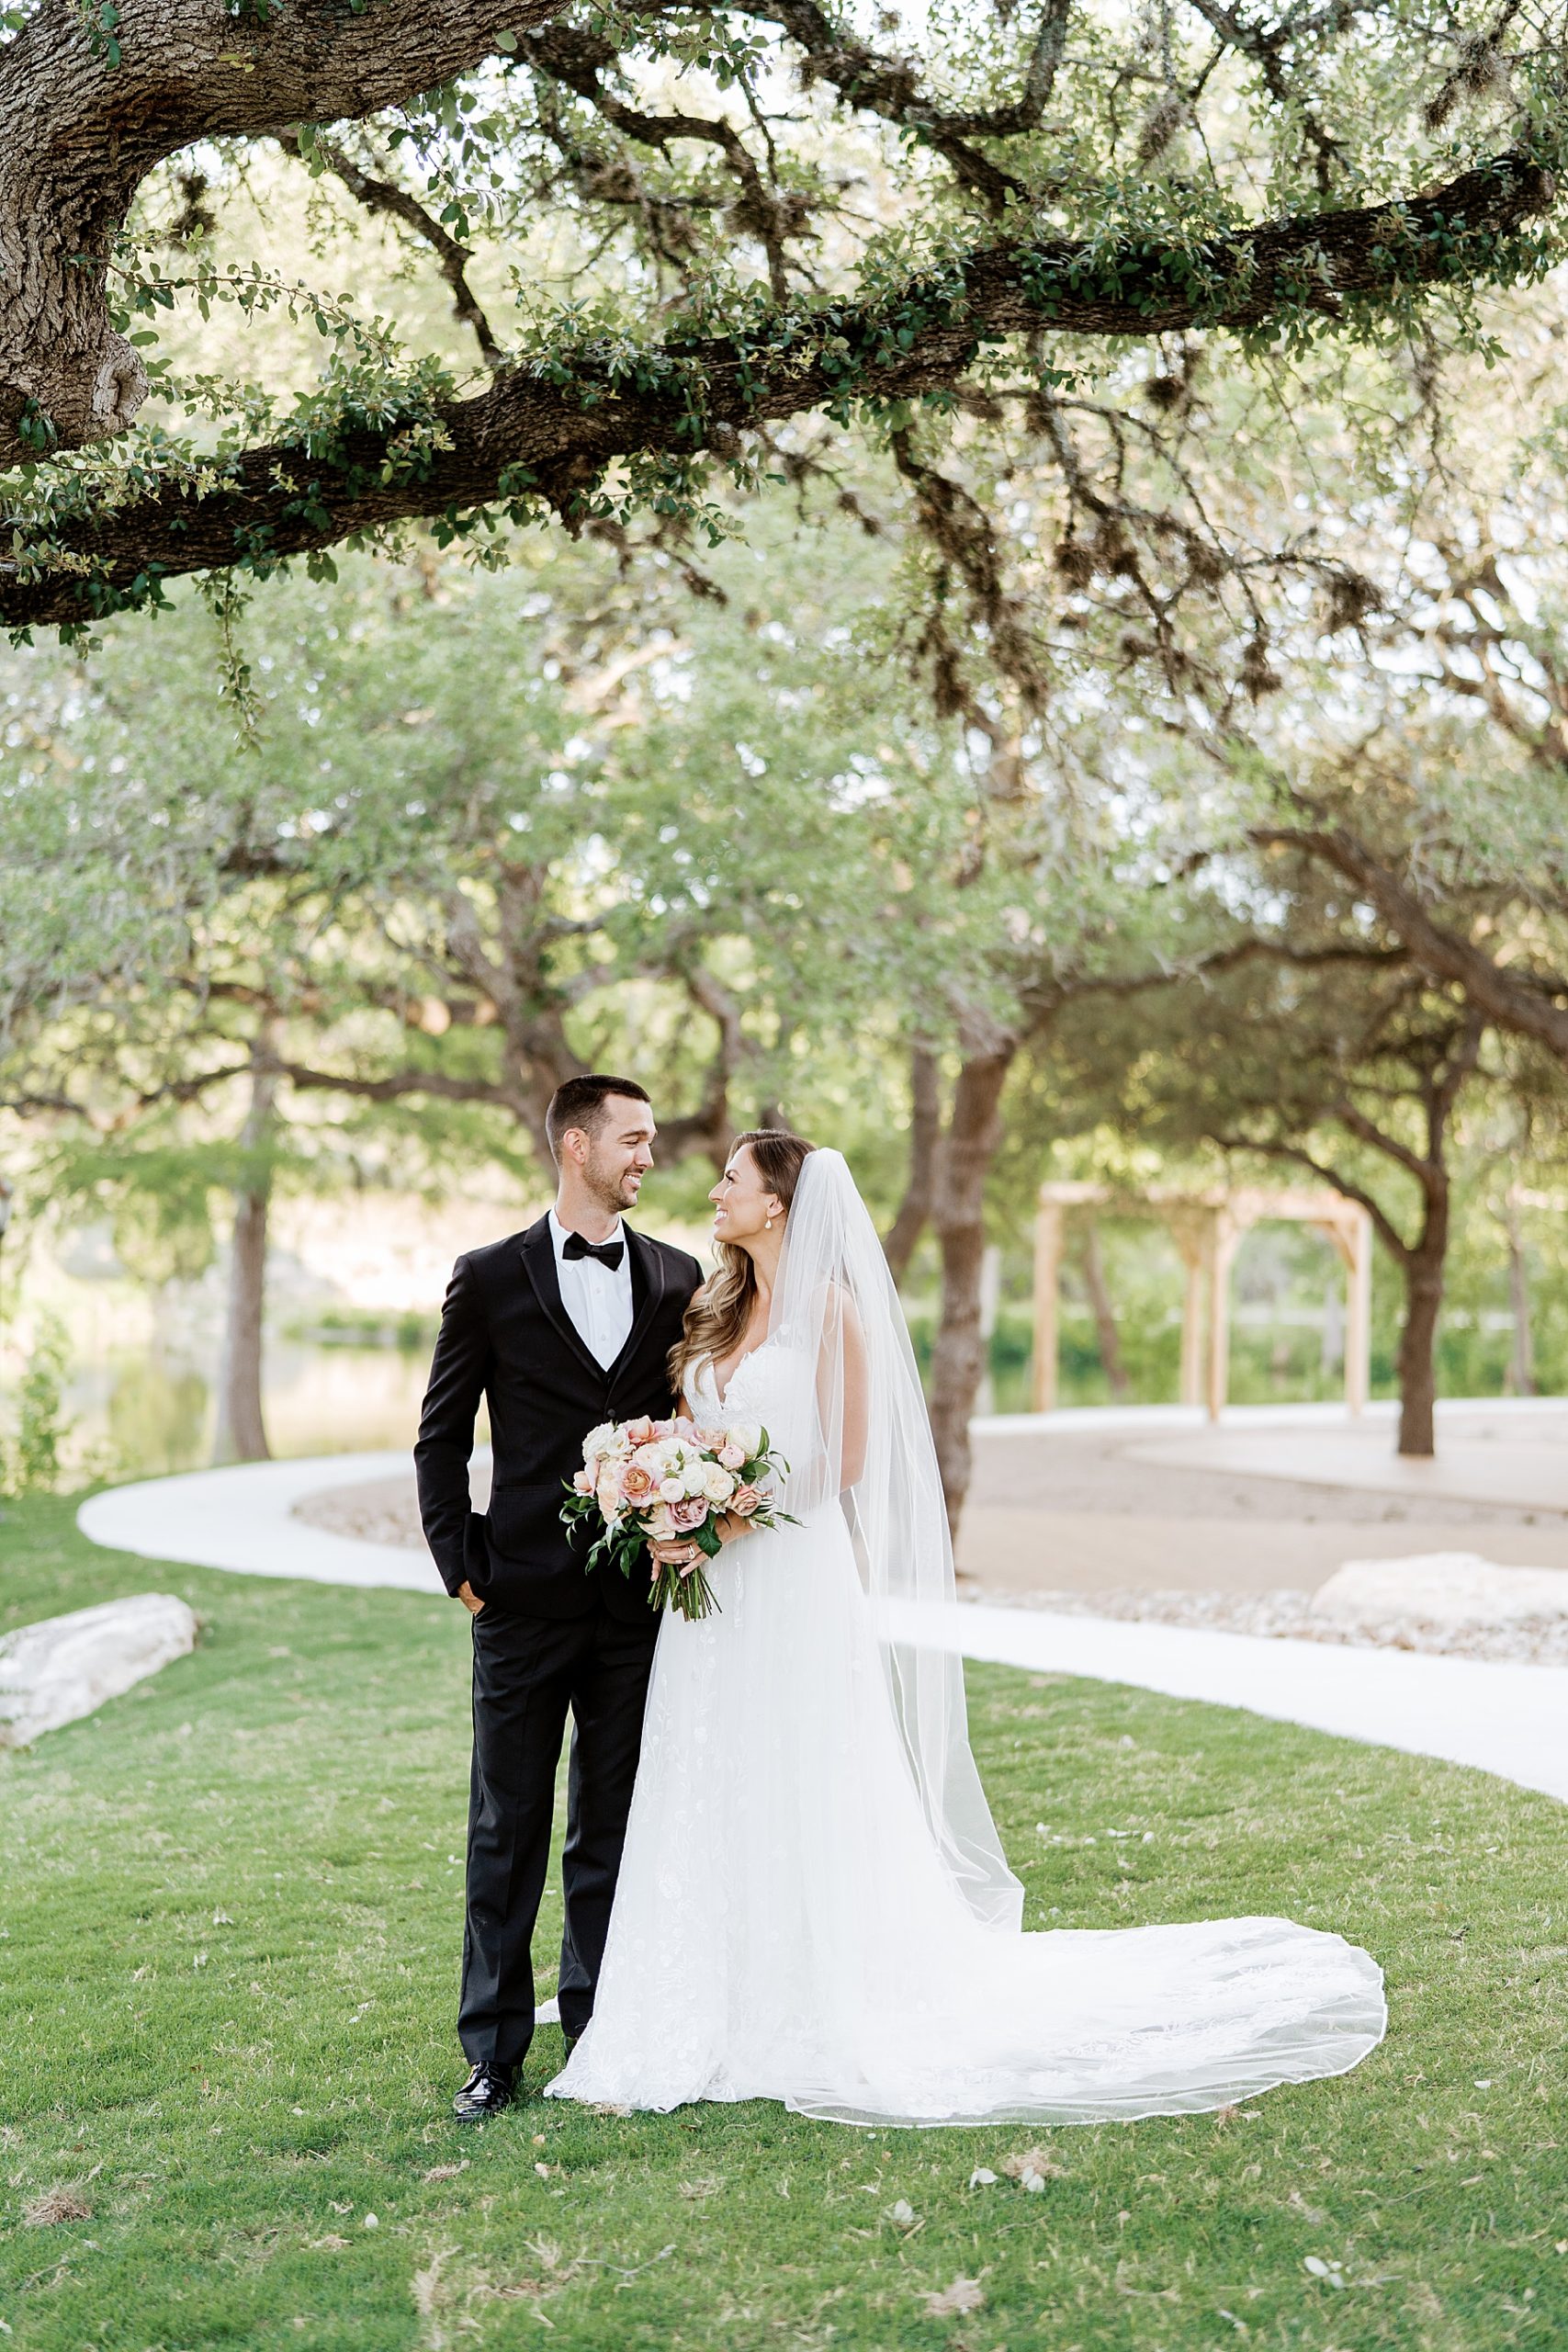 bride and groom smiling at each other on wedding day | Reiley and Rose | Central Texas Wedding Floral Designer | The Preserve at Canyon Lake Wedding Venue | classic wedding inspiration, chic wedding, pink wedding color scheme | via reileyandrose.com